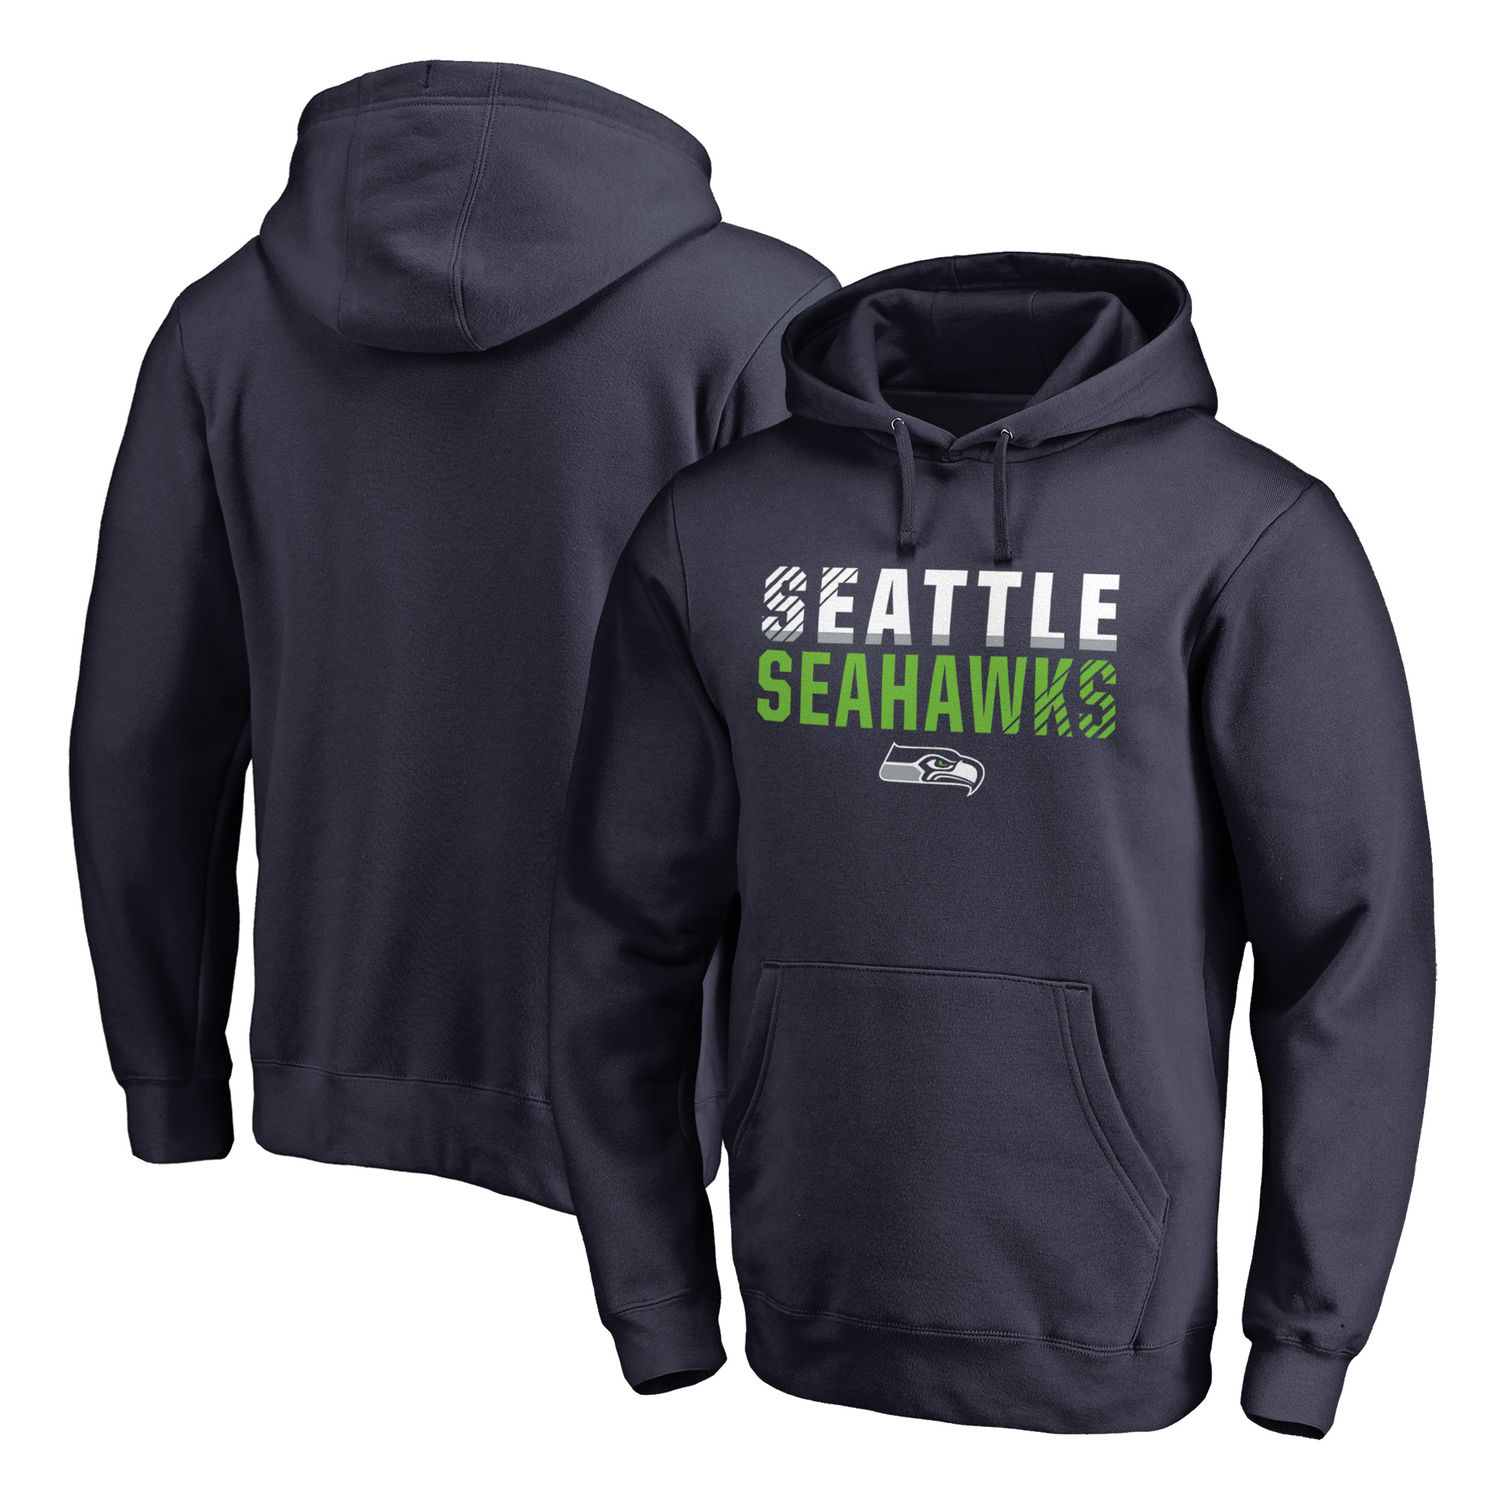 Men's Seattle Seahawks NFL Pro Line by Fanatics Branded College Navy Iconic Collection Fade Out Pullover Hoodie